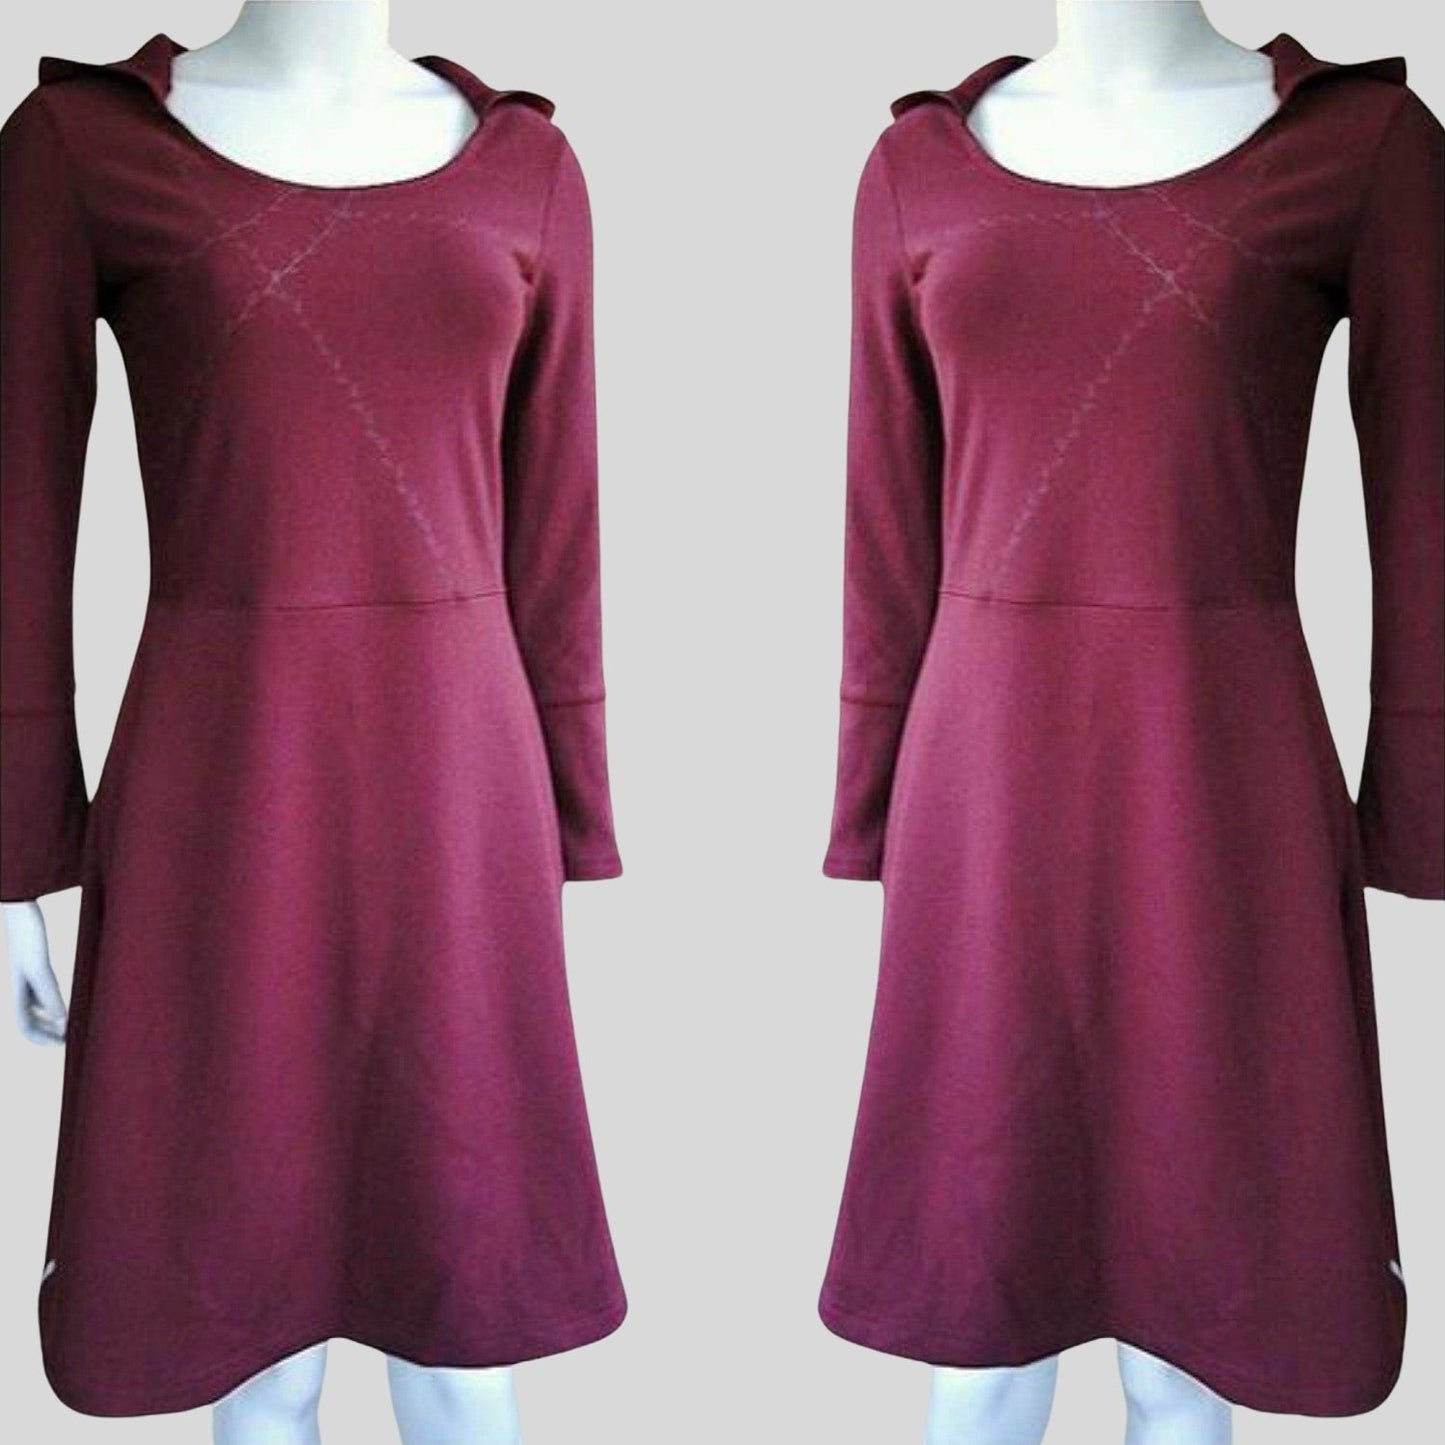 Red Hooded dress | Shop organic cotton dresses from Canada | Econica 